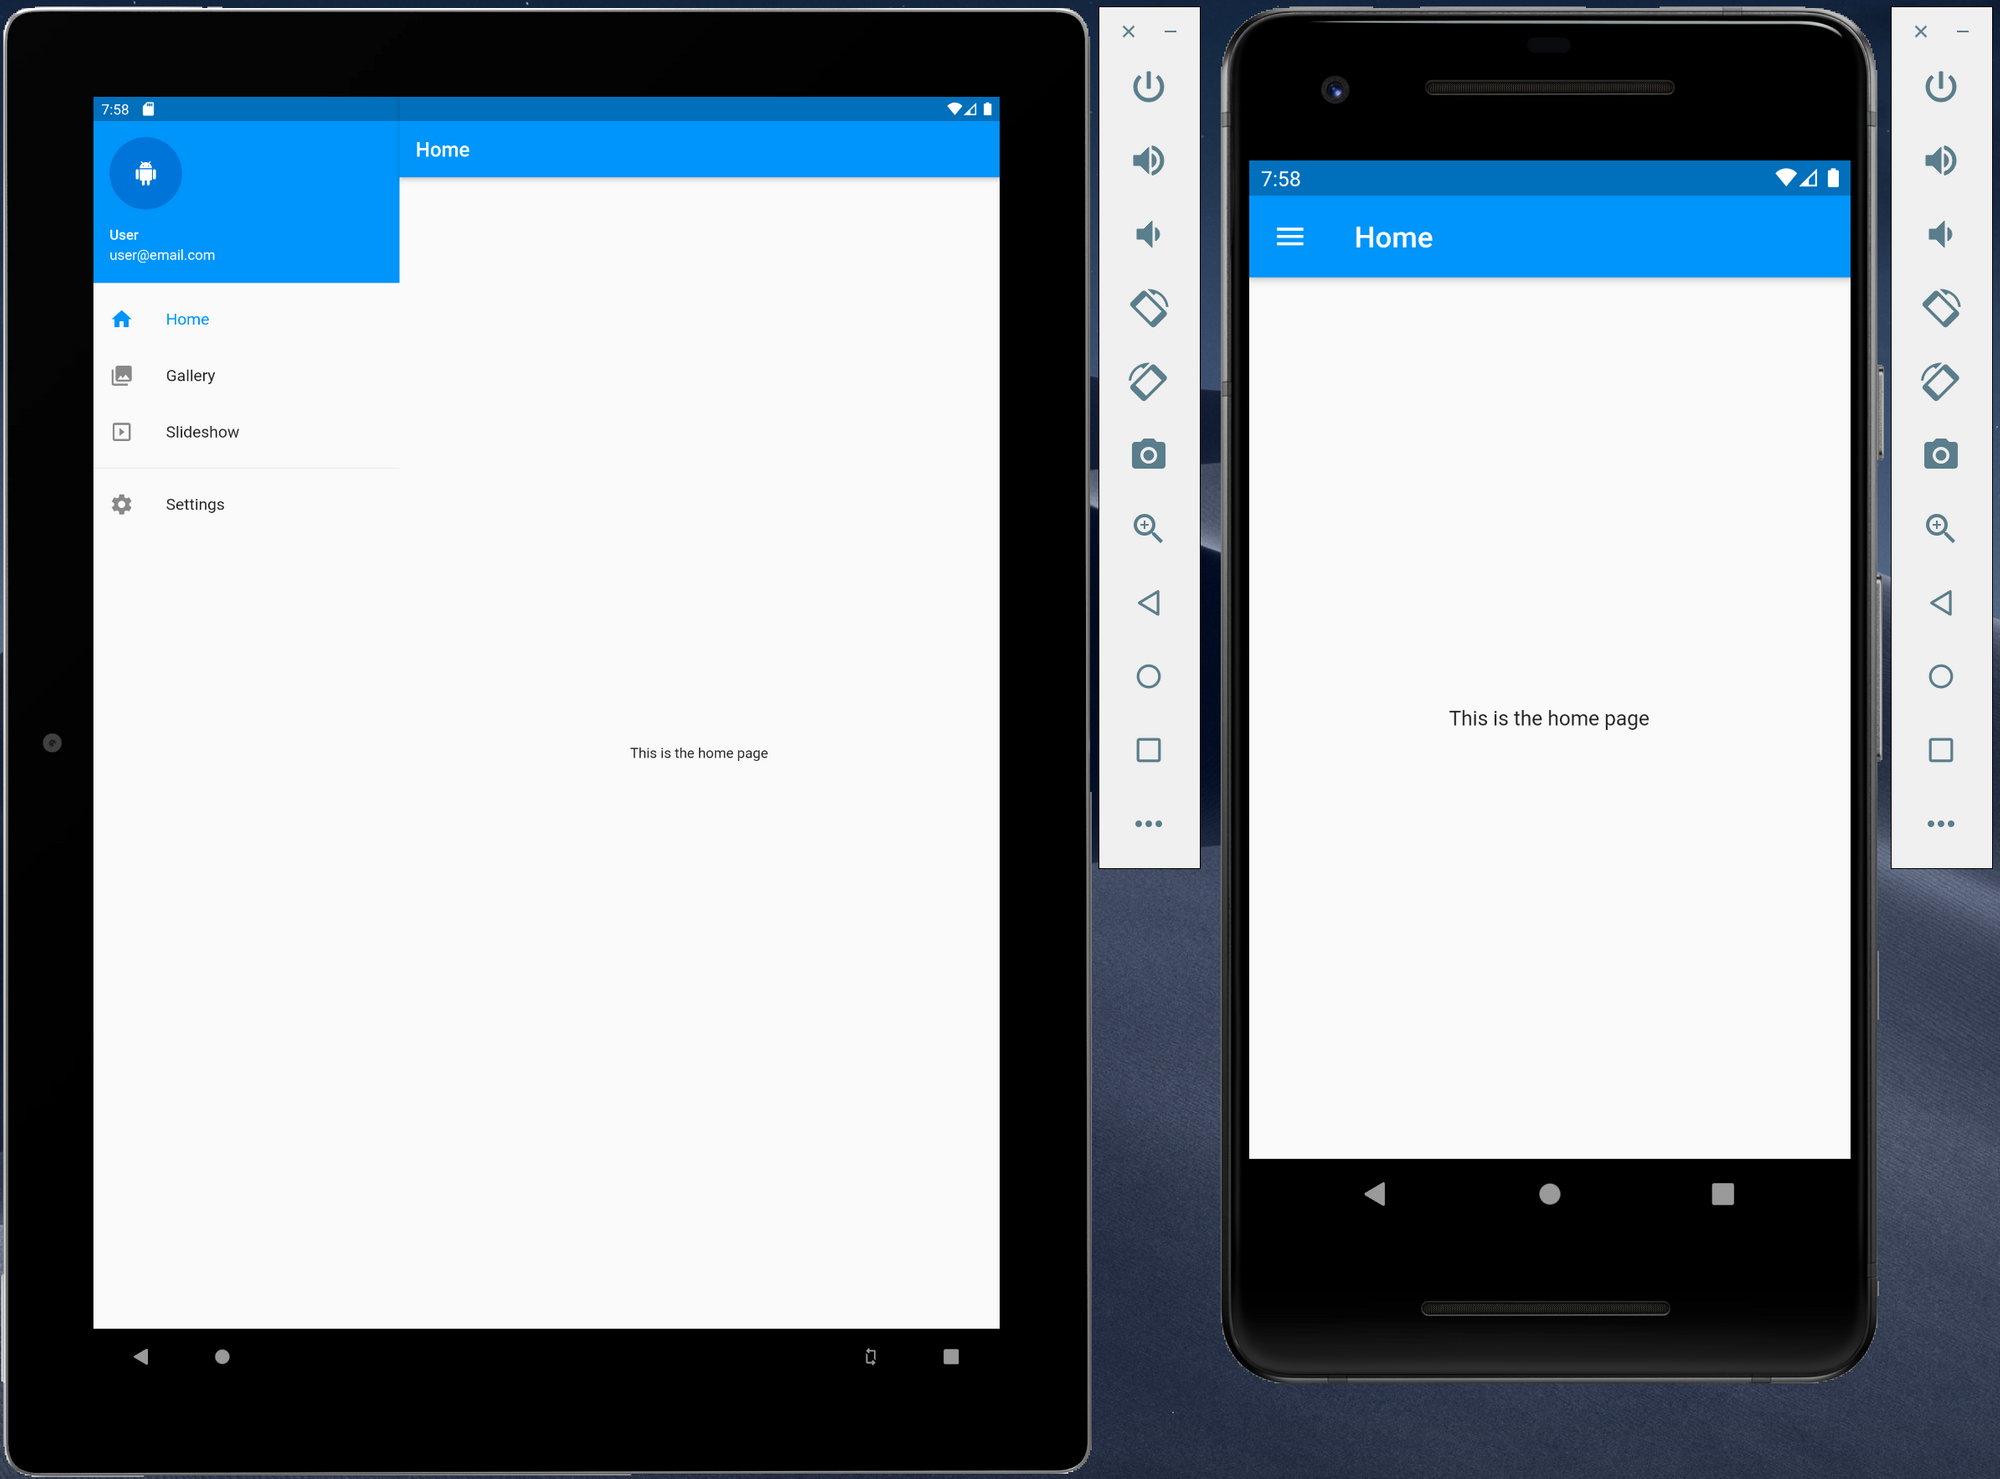 Creating a responsive Flutter application using Material Design using a